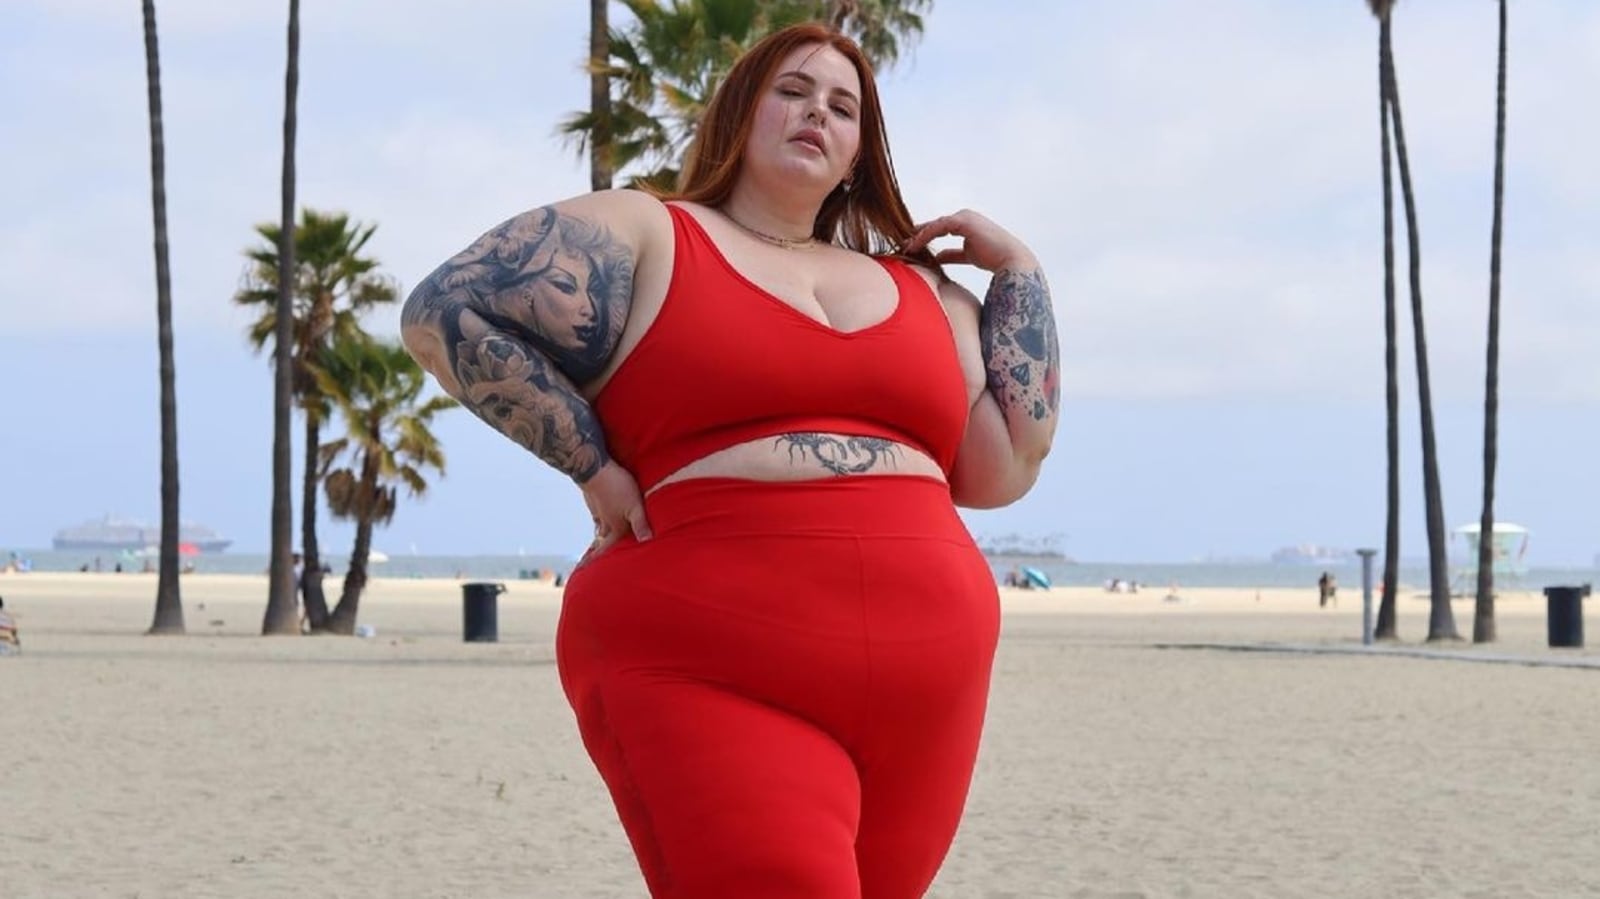 I am anorexic: Plus-size model Tess Holiday shares recovery from